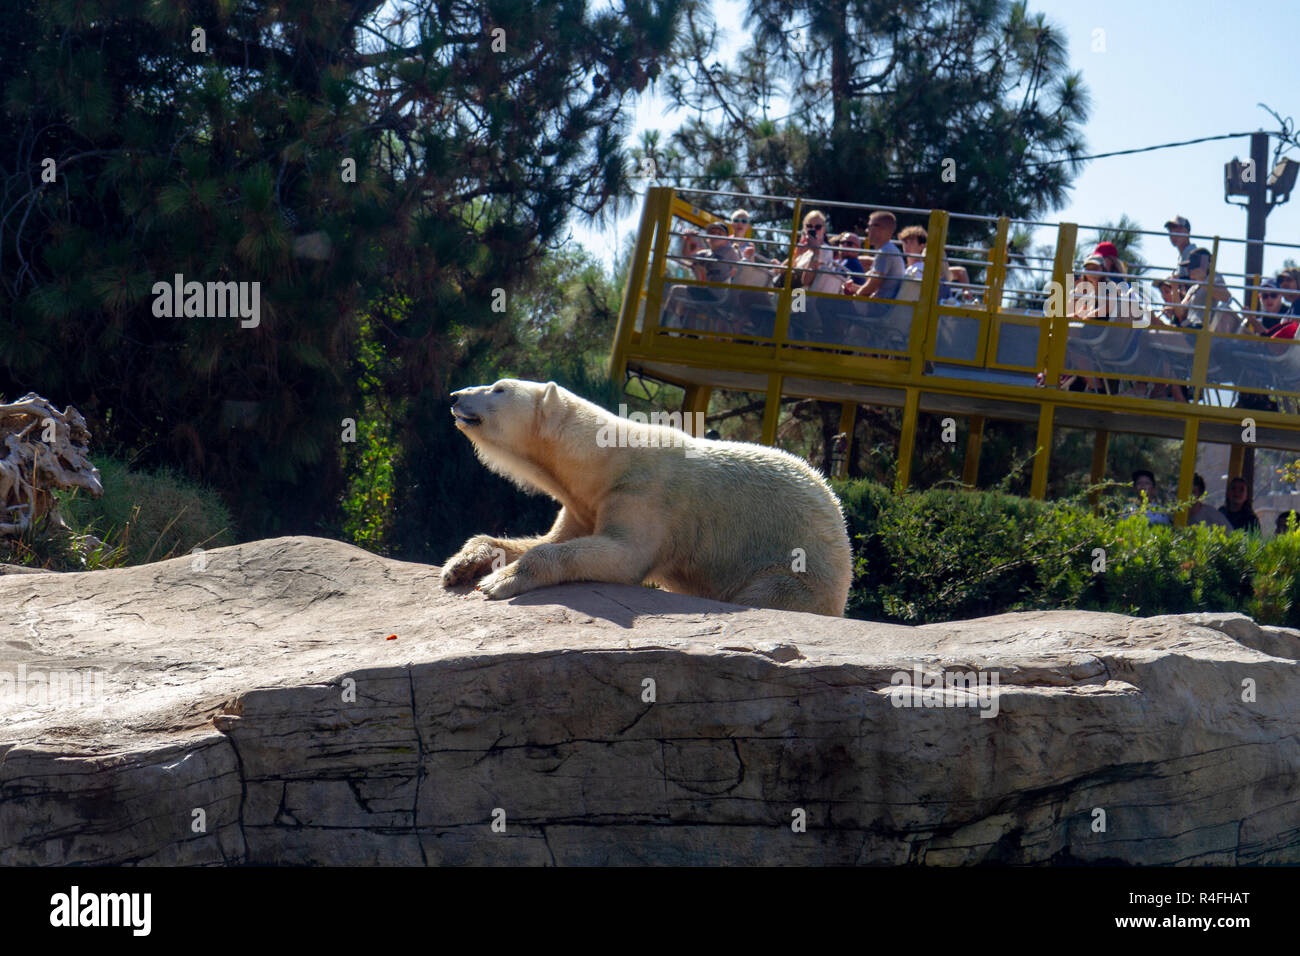 A zoo guided bus tour passing the a polar bear in its enclosure, San Diego Zoo, California, United States. Stock Photo